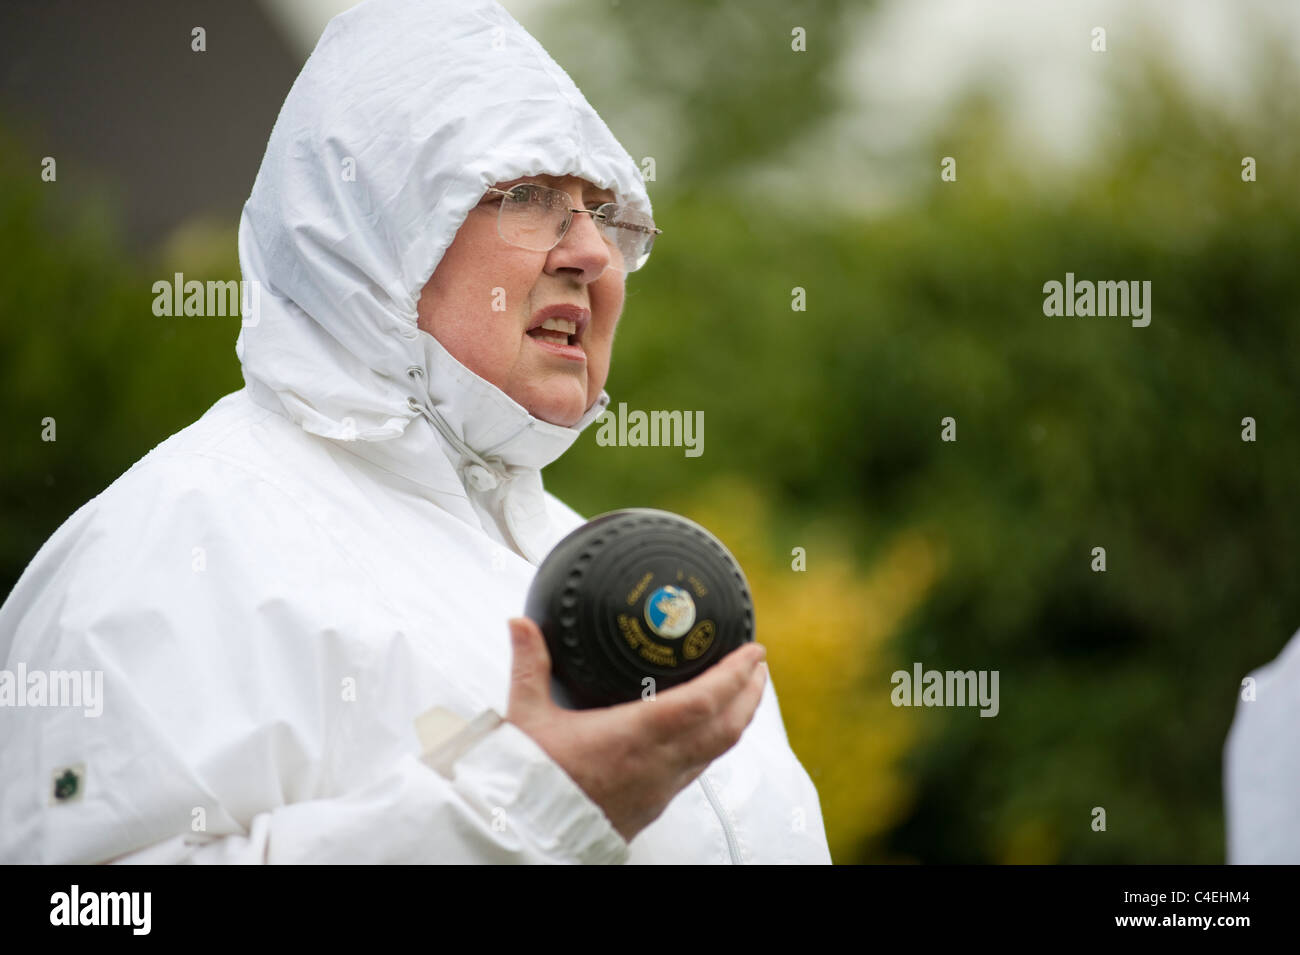 A female lawn bowls player in glasses and wet weather gear during a rainy afternoons bowls match Stock Photo